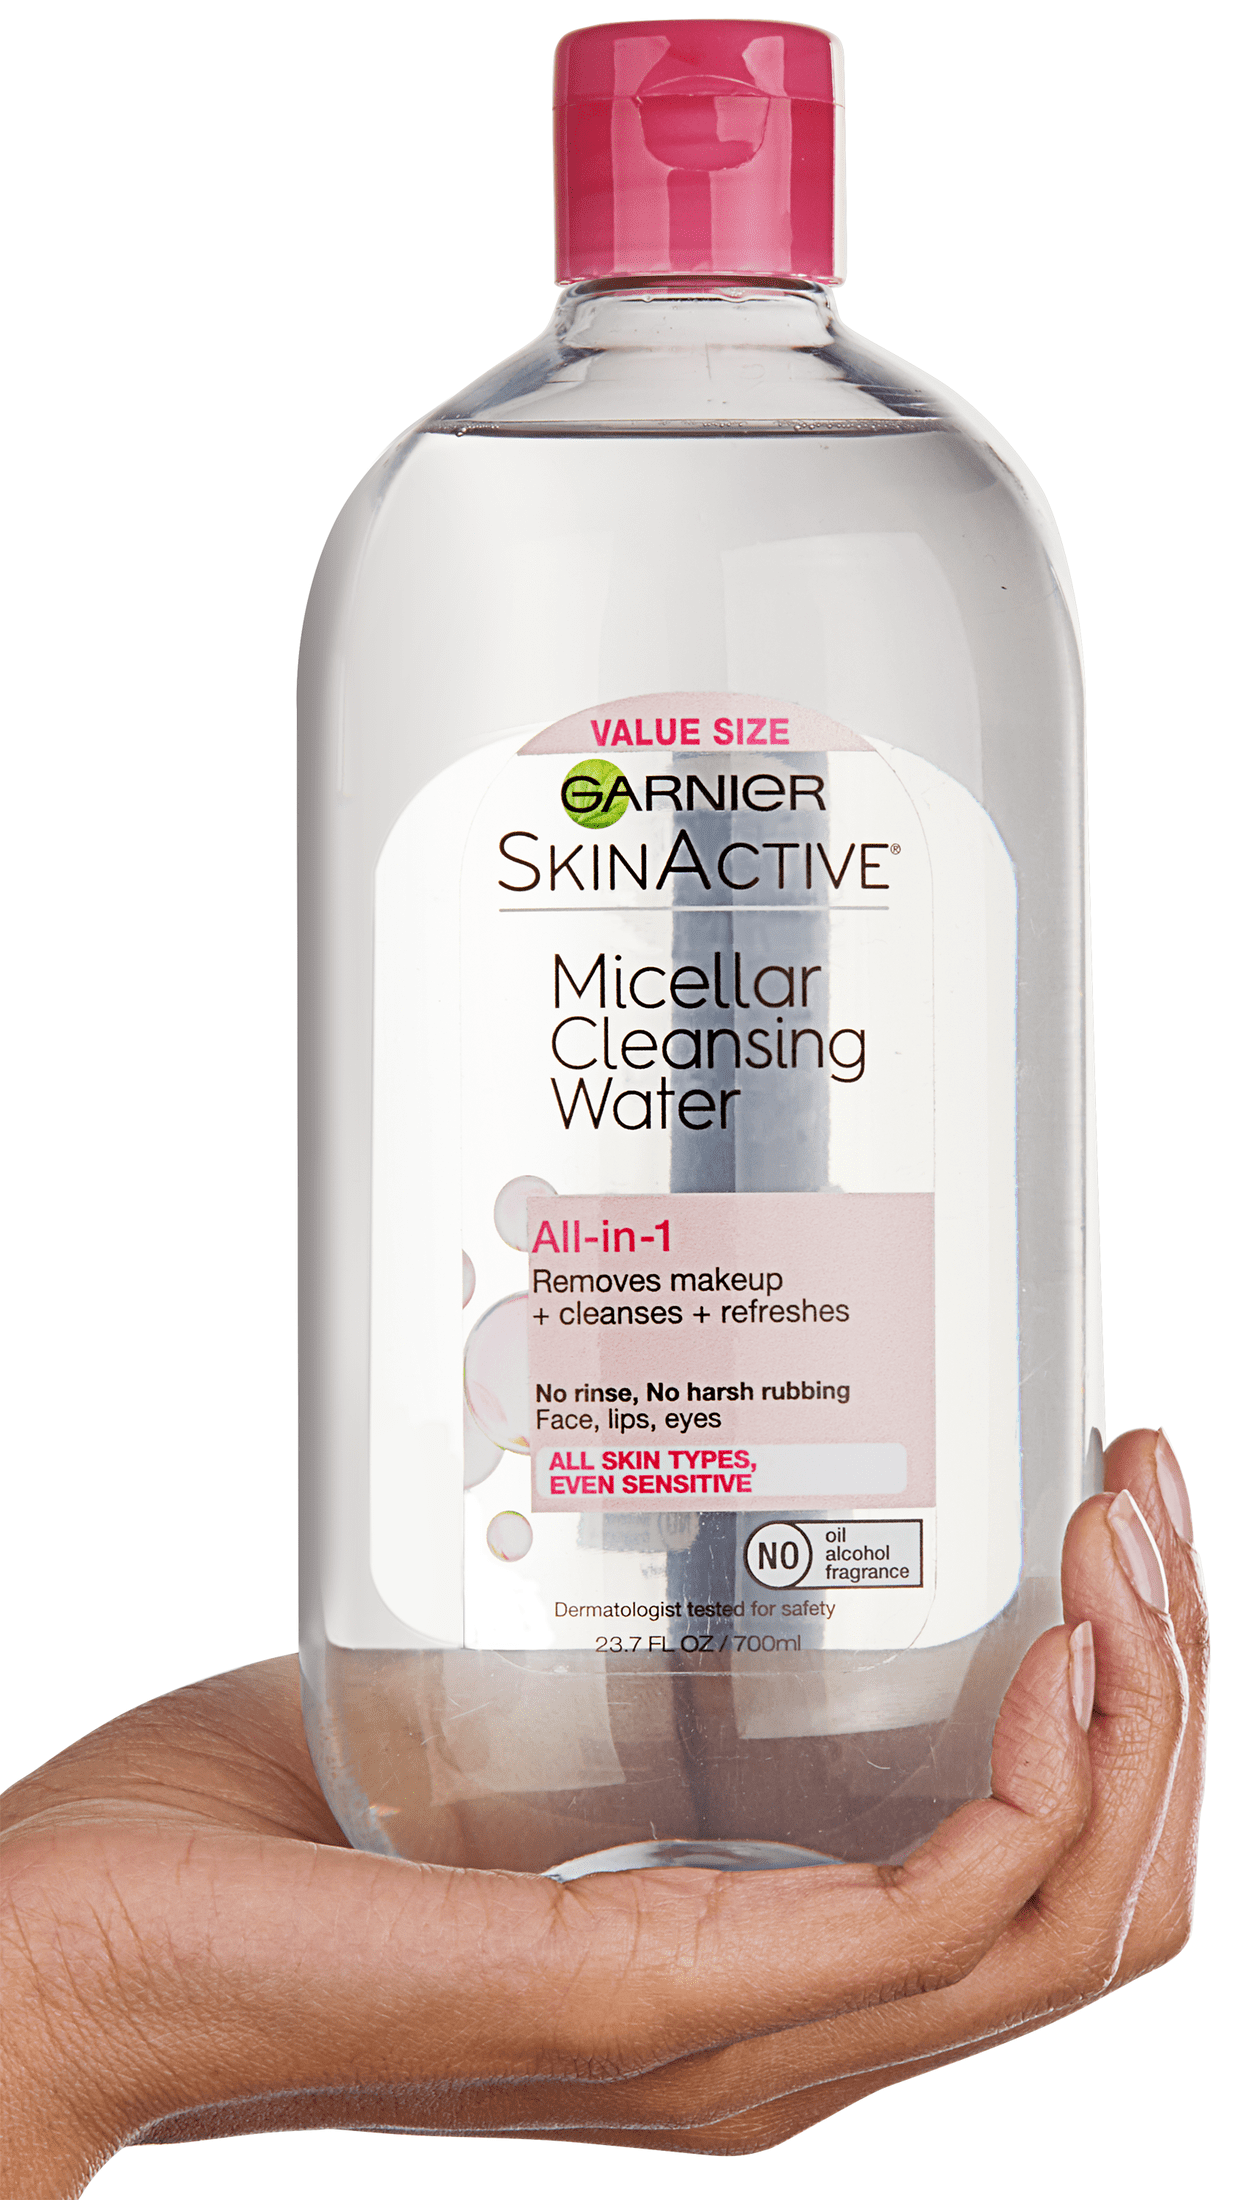 Skinactive Micellar Cleansing Water All in 1 Makeup Remover, 23.7 Fl Oz